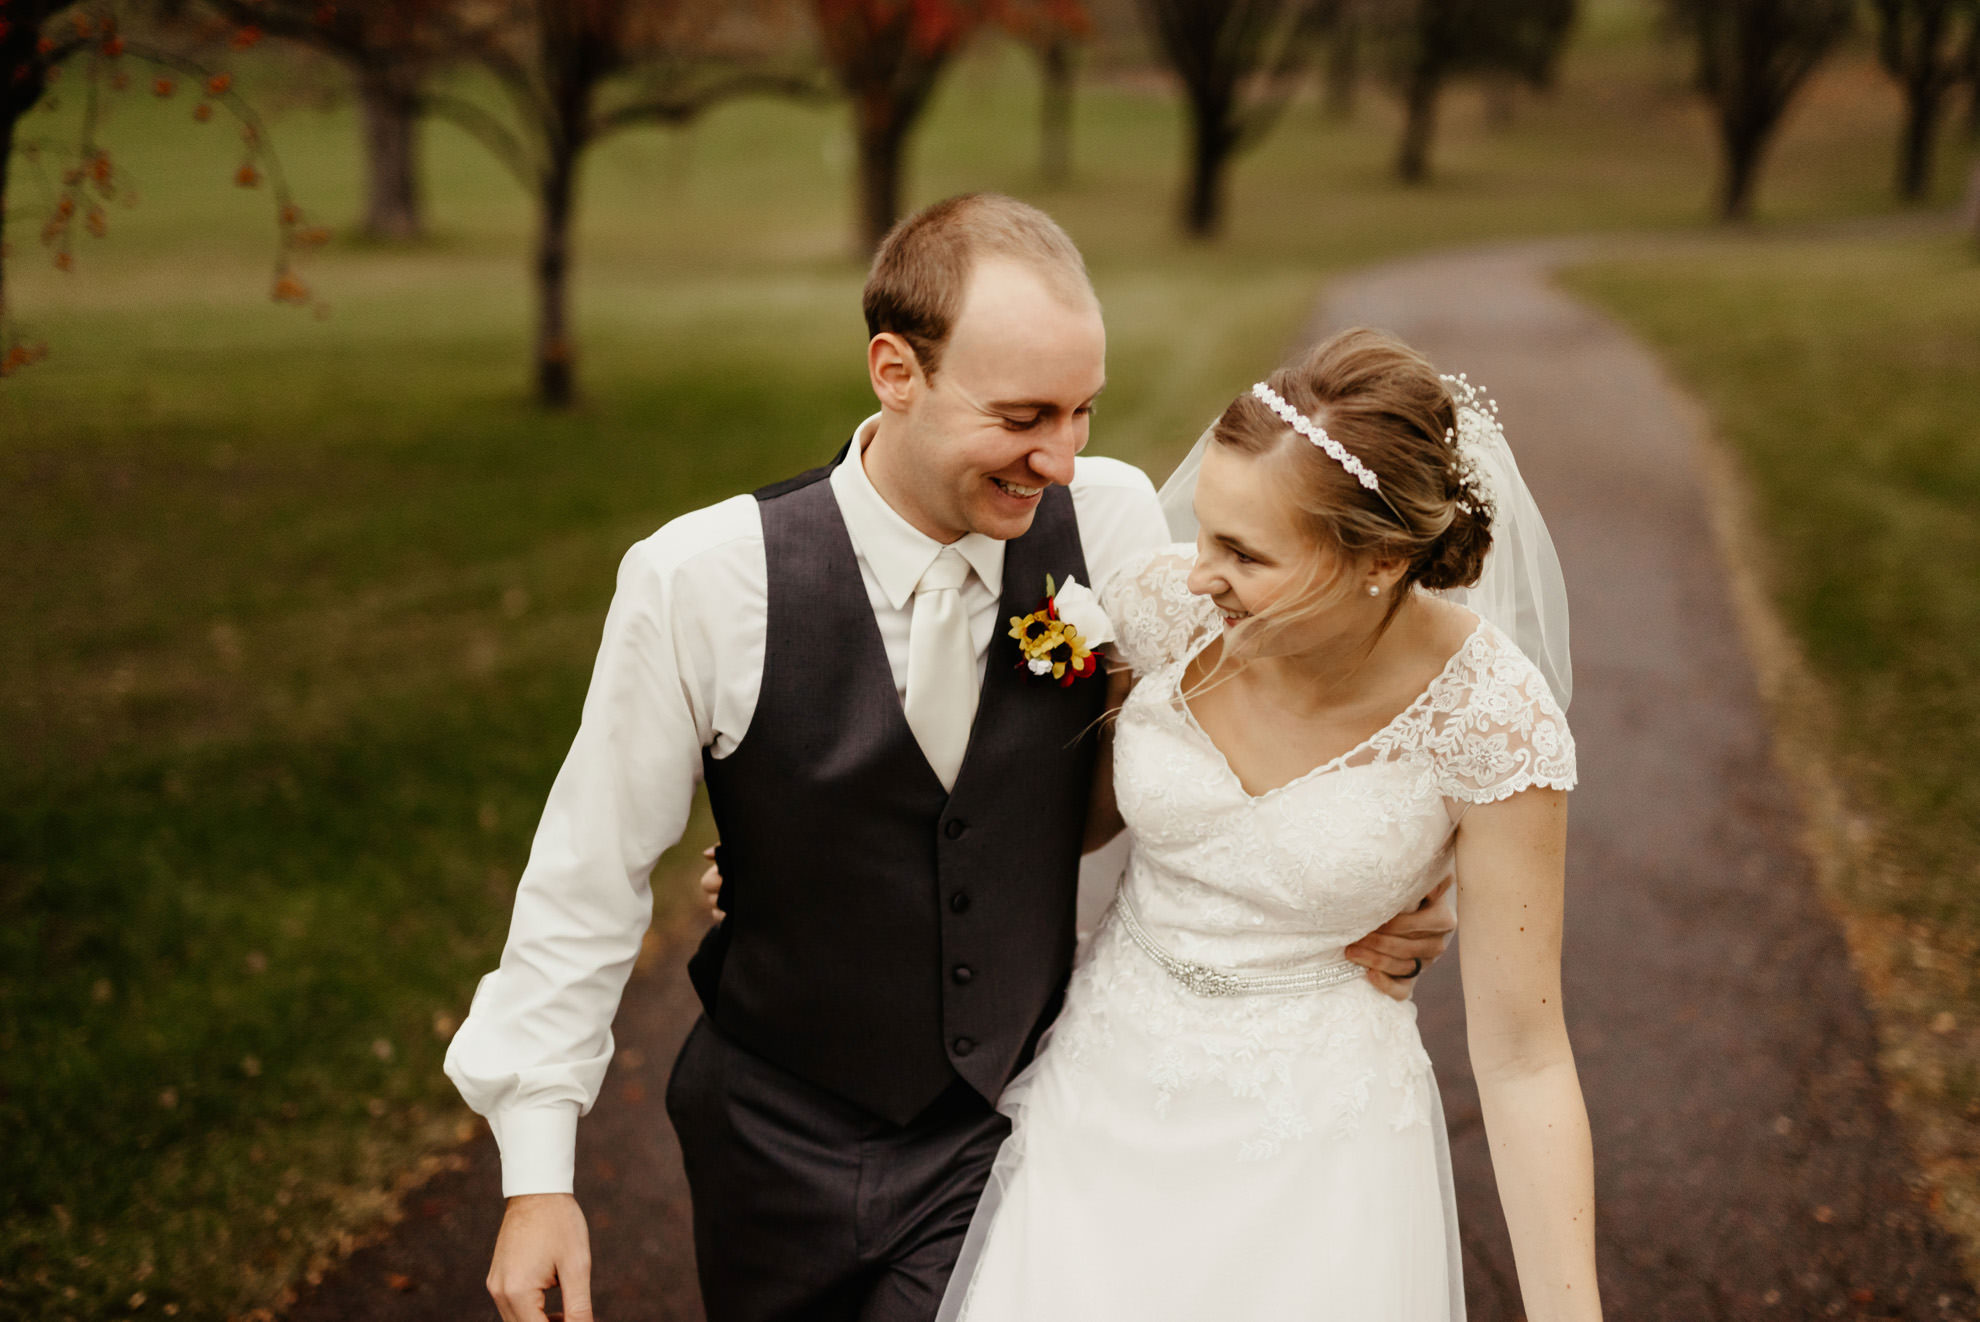 Bride and groom walking together laughing